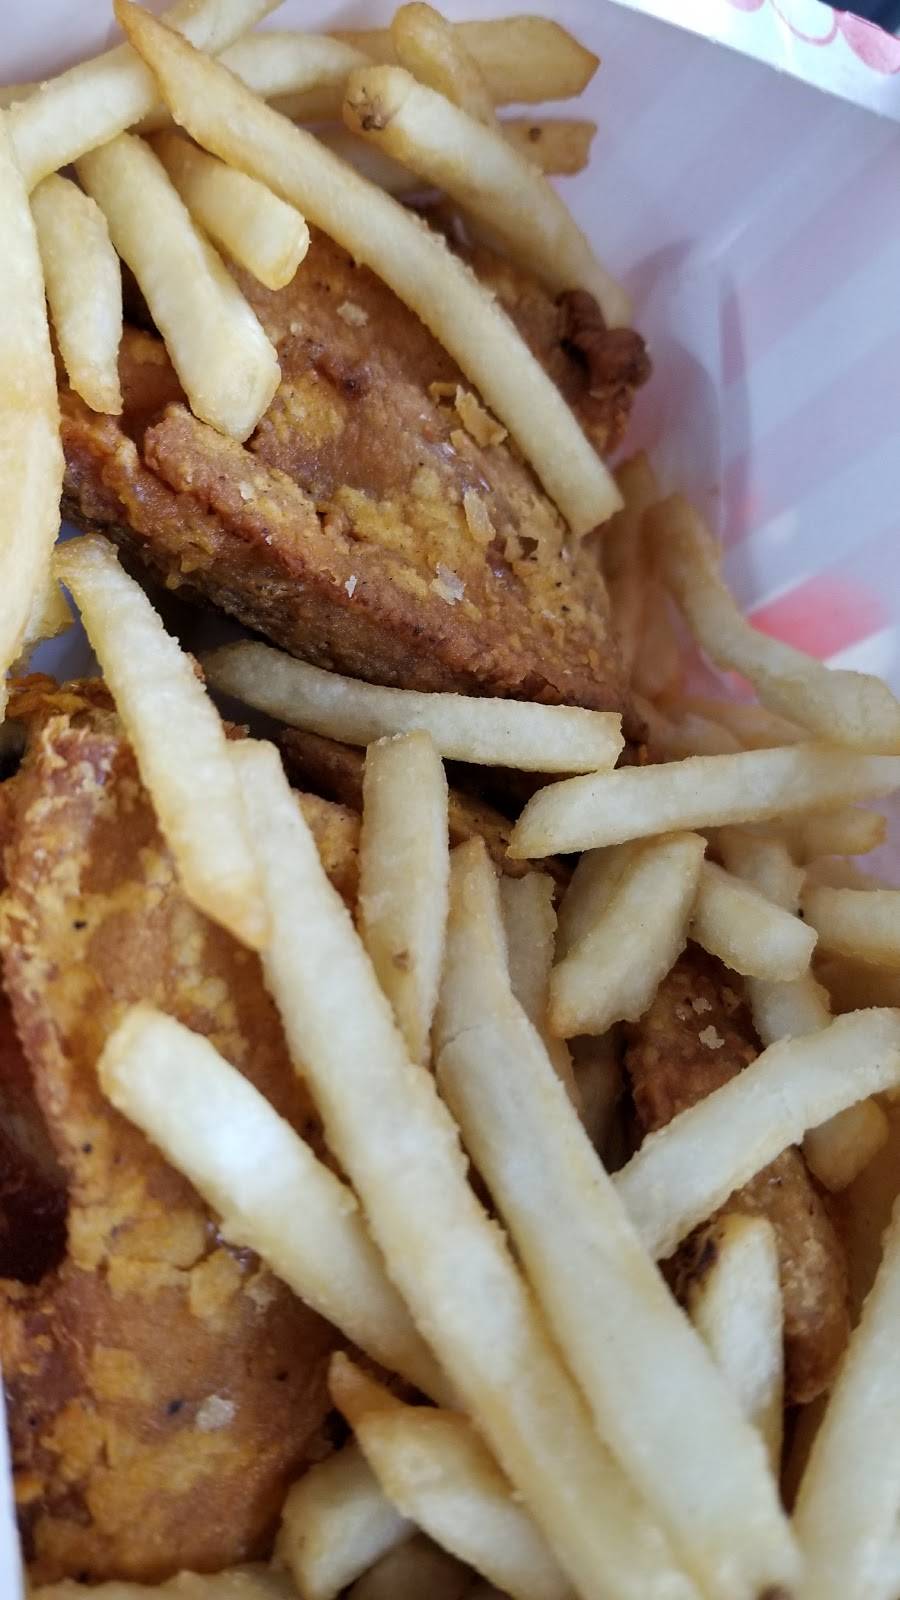 Hollywood Fried Chicken | restaurant | 431 Central Ave, Jersey City, NJ 07307, USA | 2019630400 OR +1 201-963-0400